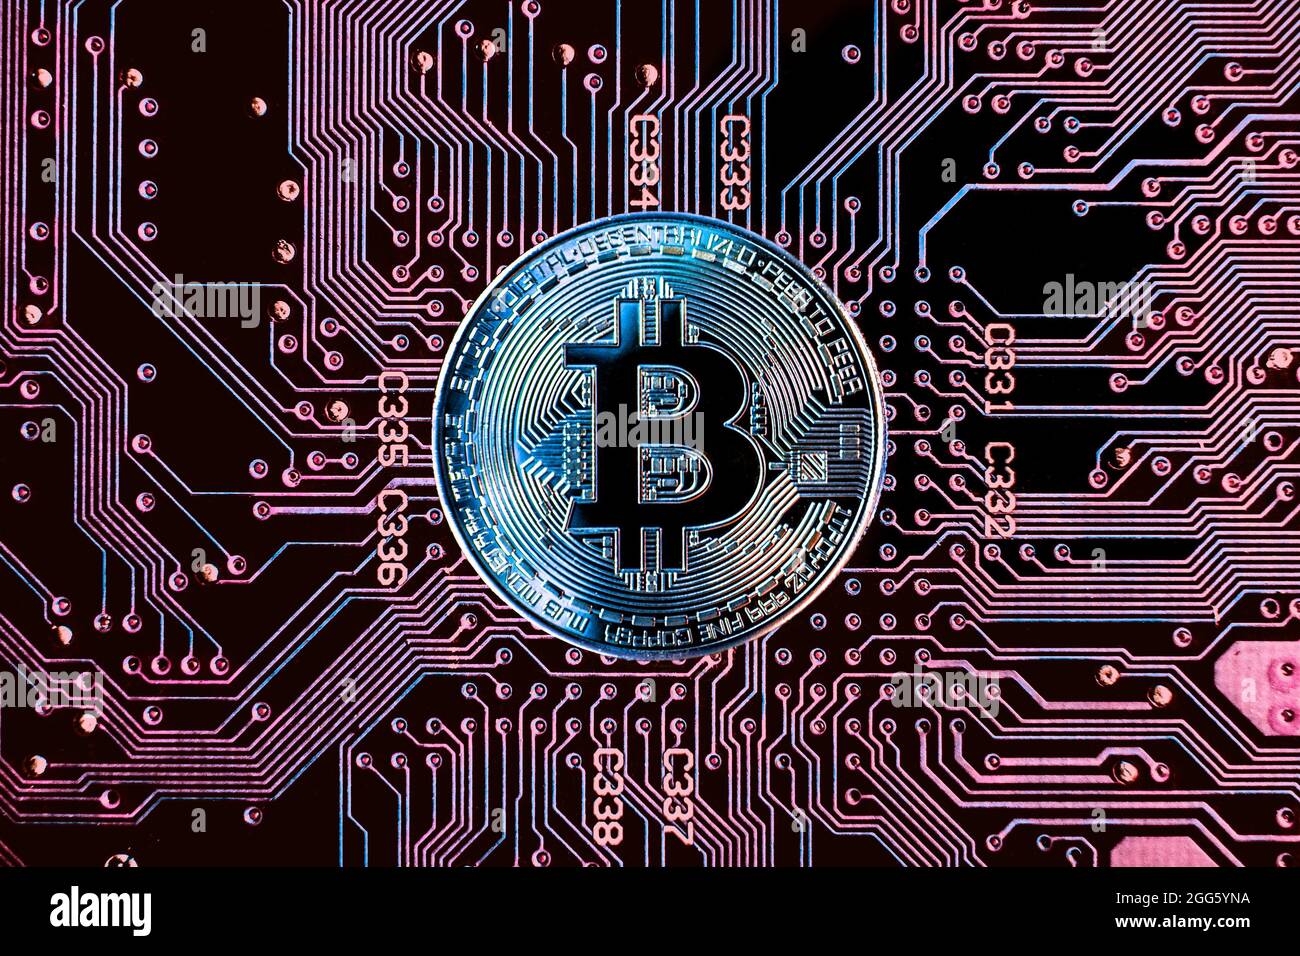 Bitcoin cryptocurrency token coin against circuit board background Stock Photo